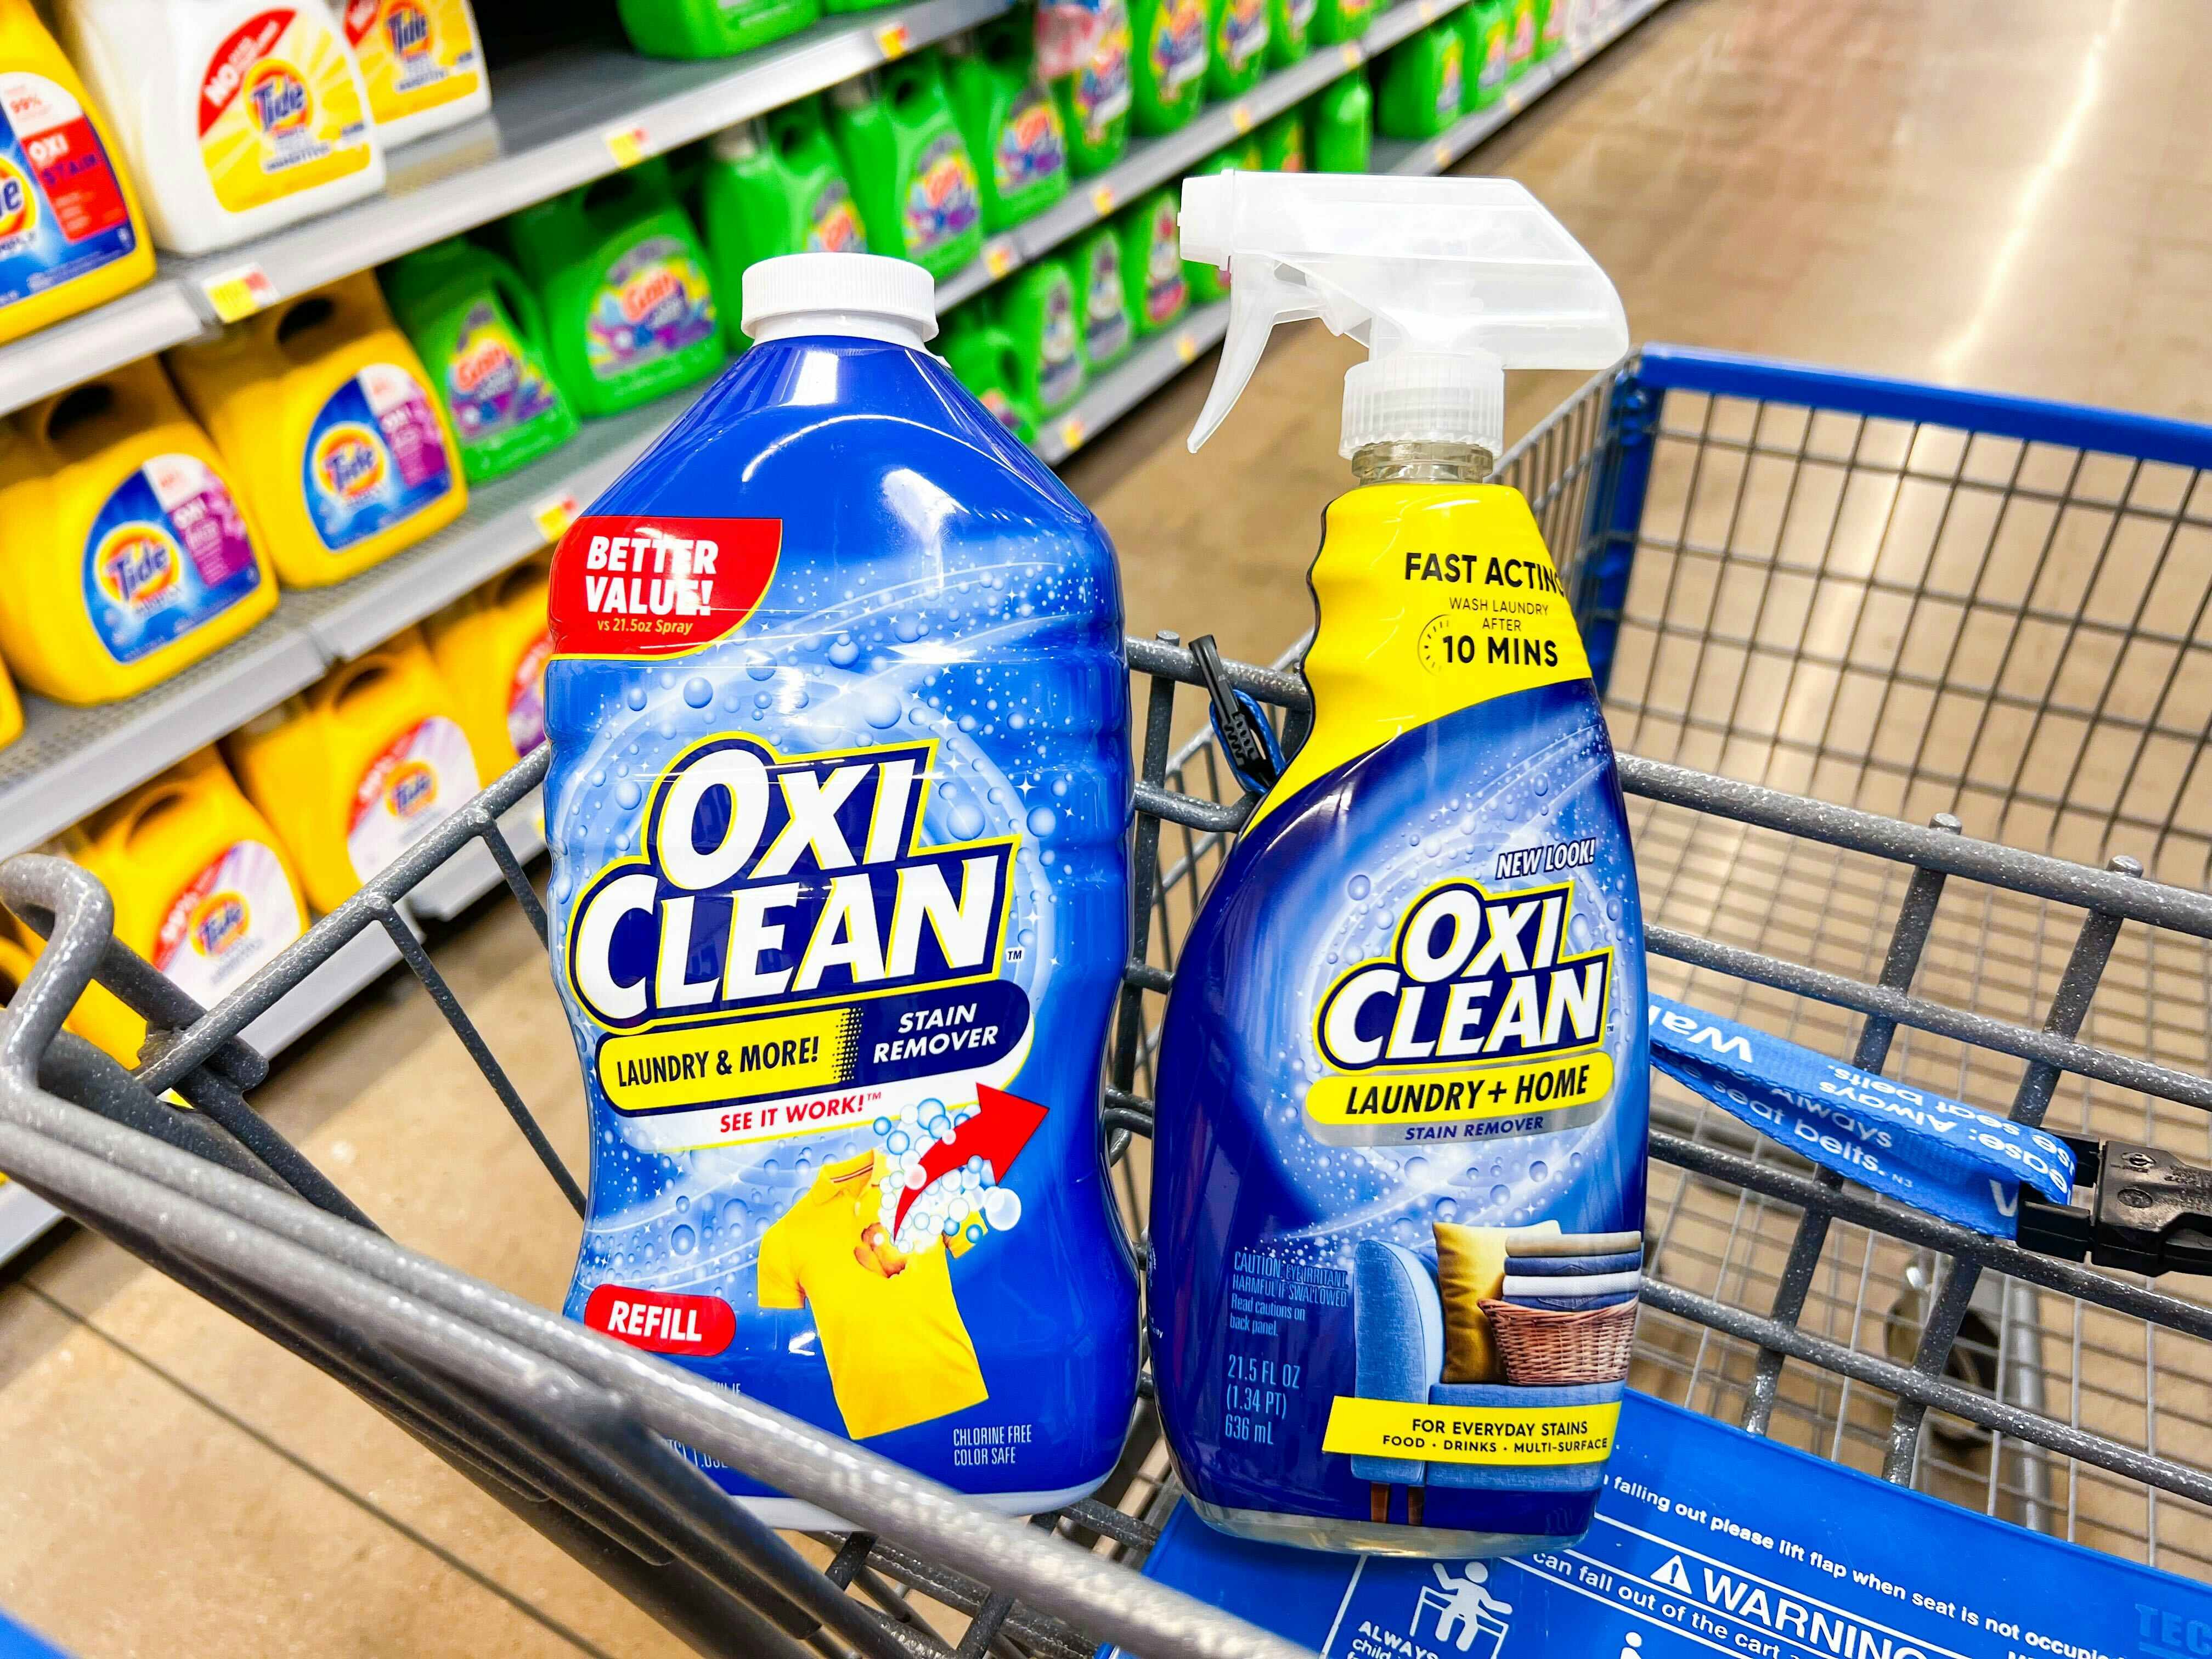 Save $2.50 on OxiClean at Target and Walmart